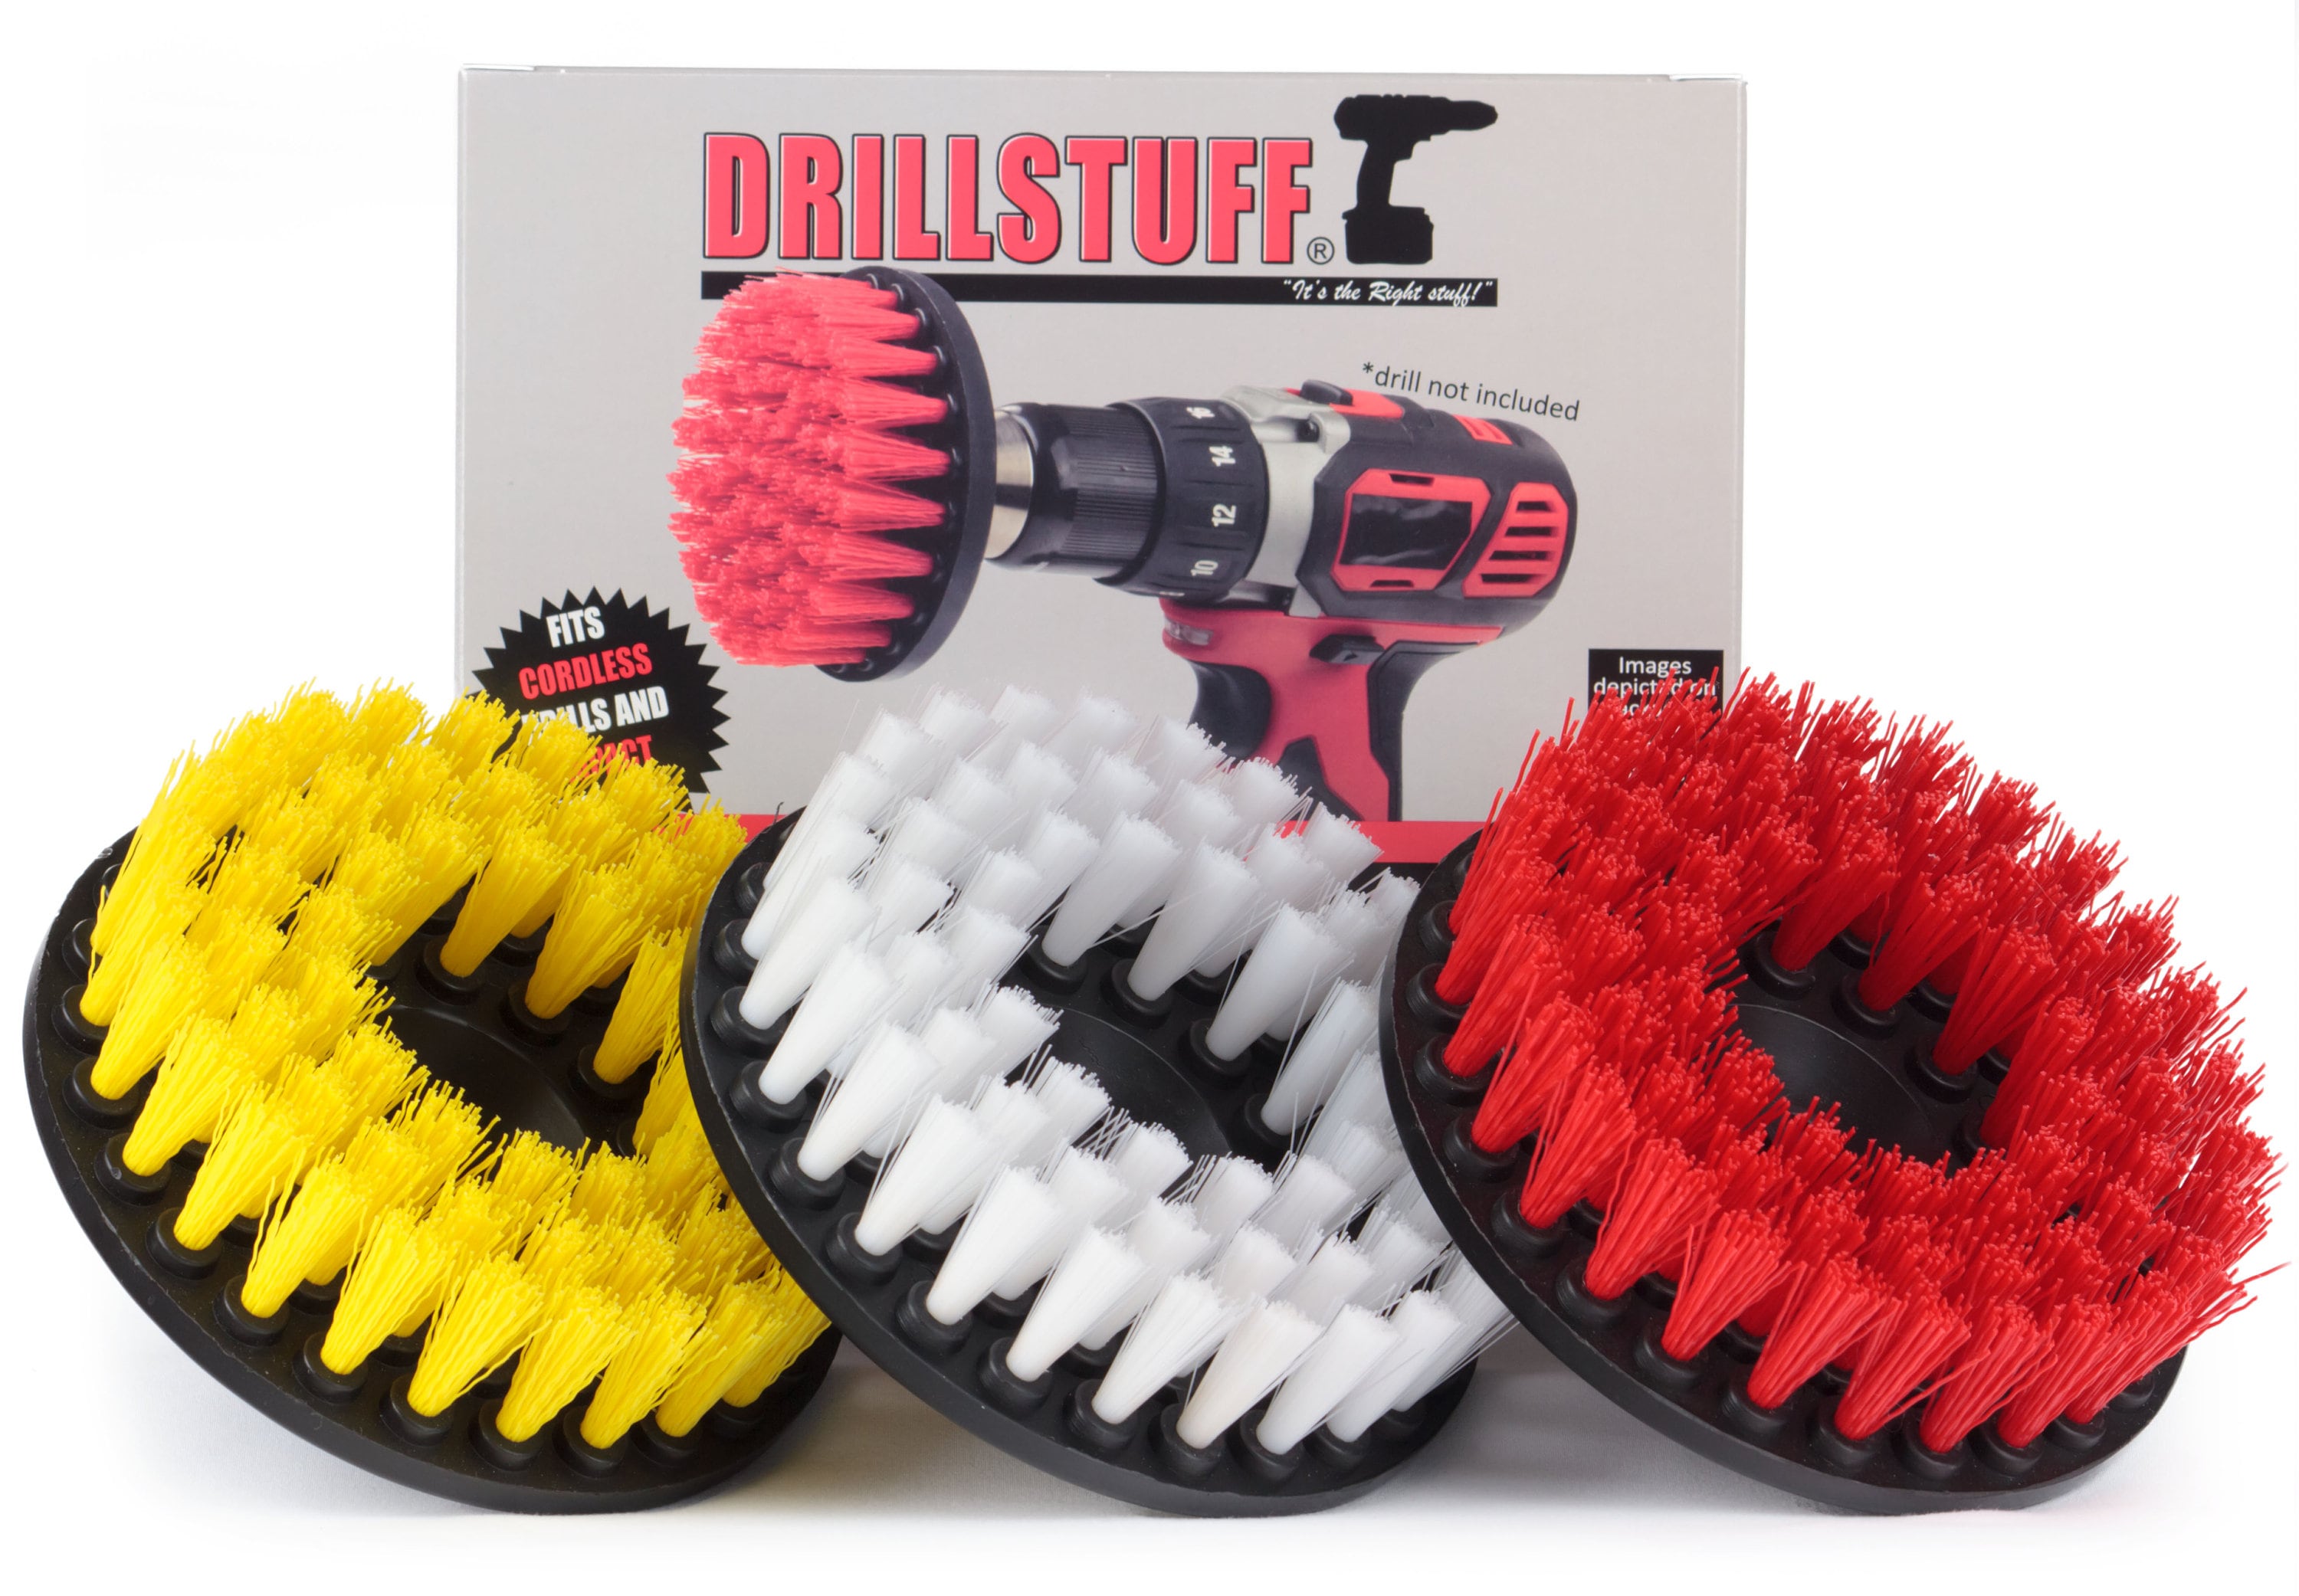 Drillstuff Oven Cleaning Brush, Sink, Concrete, Masonry Brush, Patio, Deck, Garden Scrub Brushes, Tile & Grout Cleaner